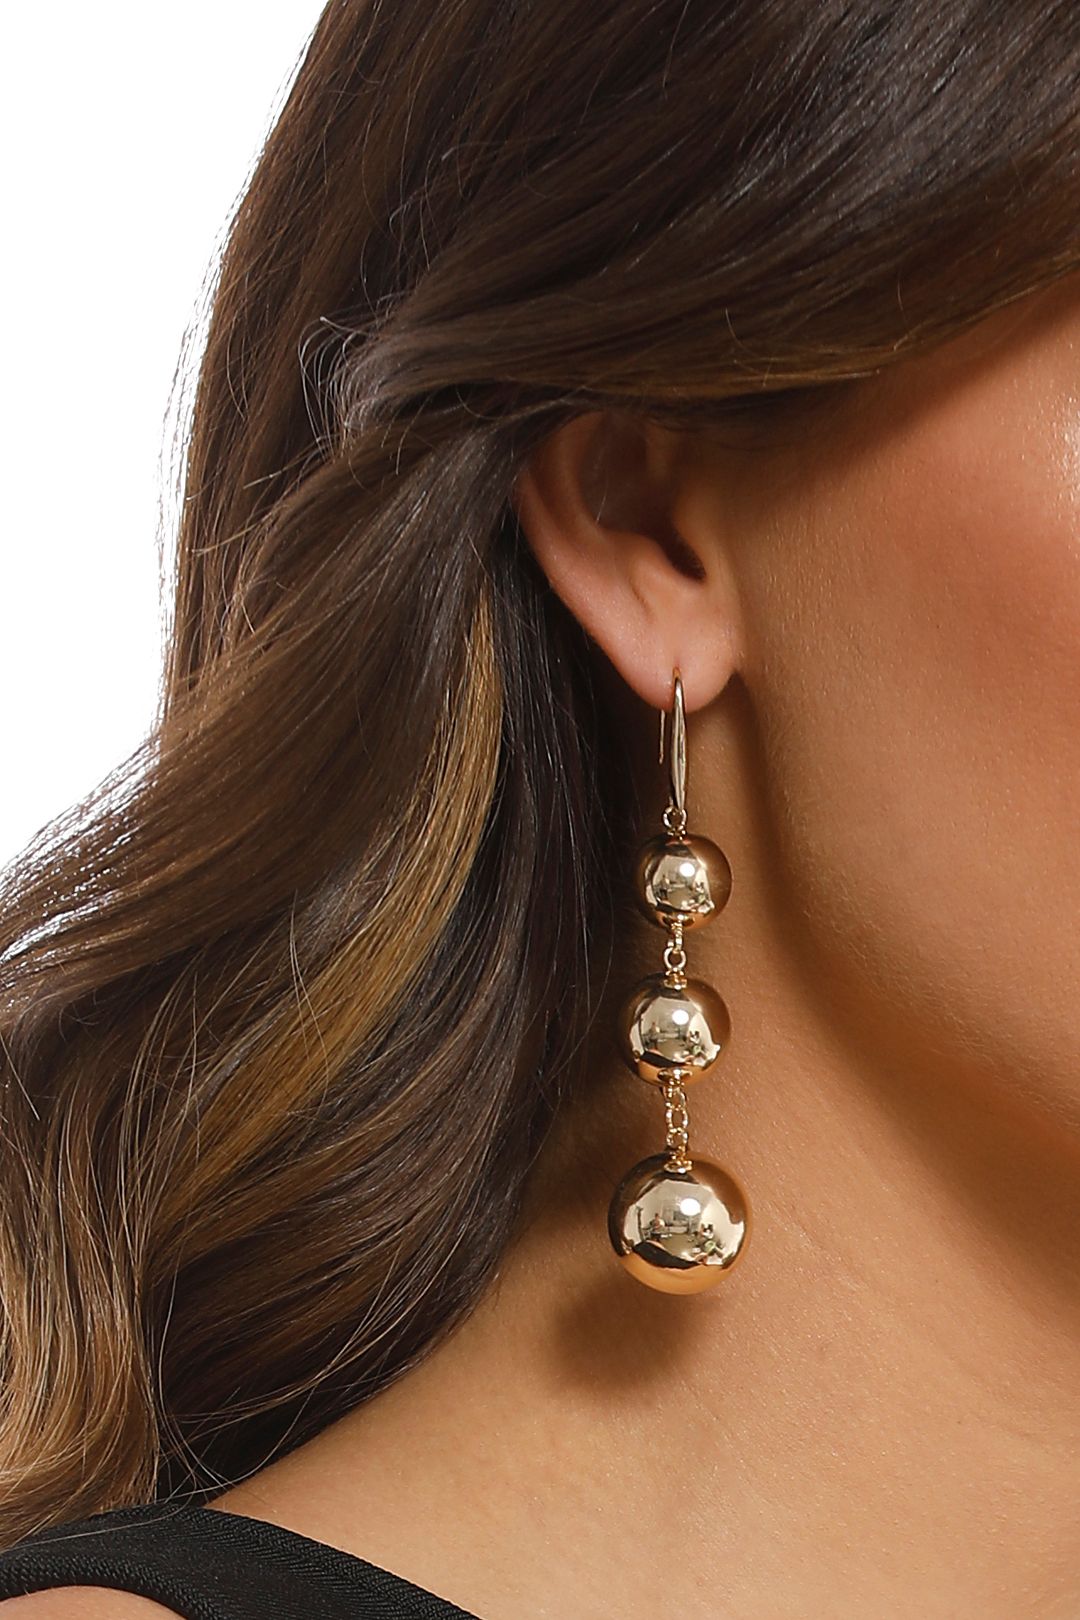 Adorne - Three Ball Drop Hook Earrings - Gold - Product